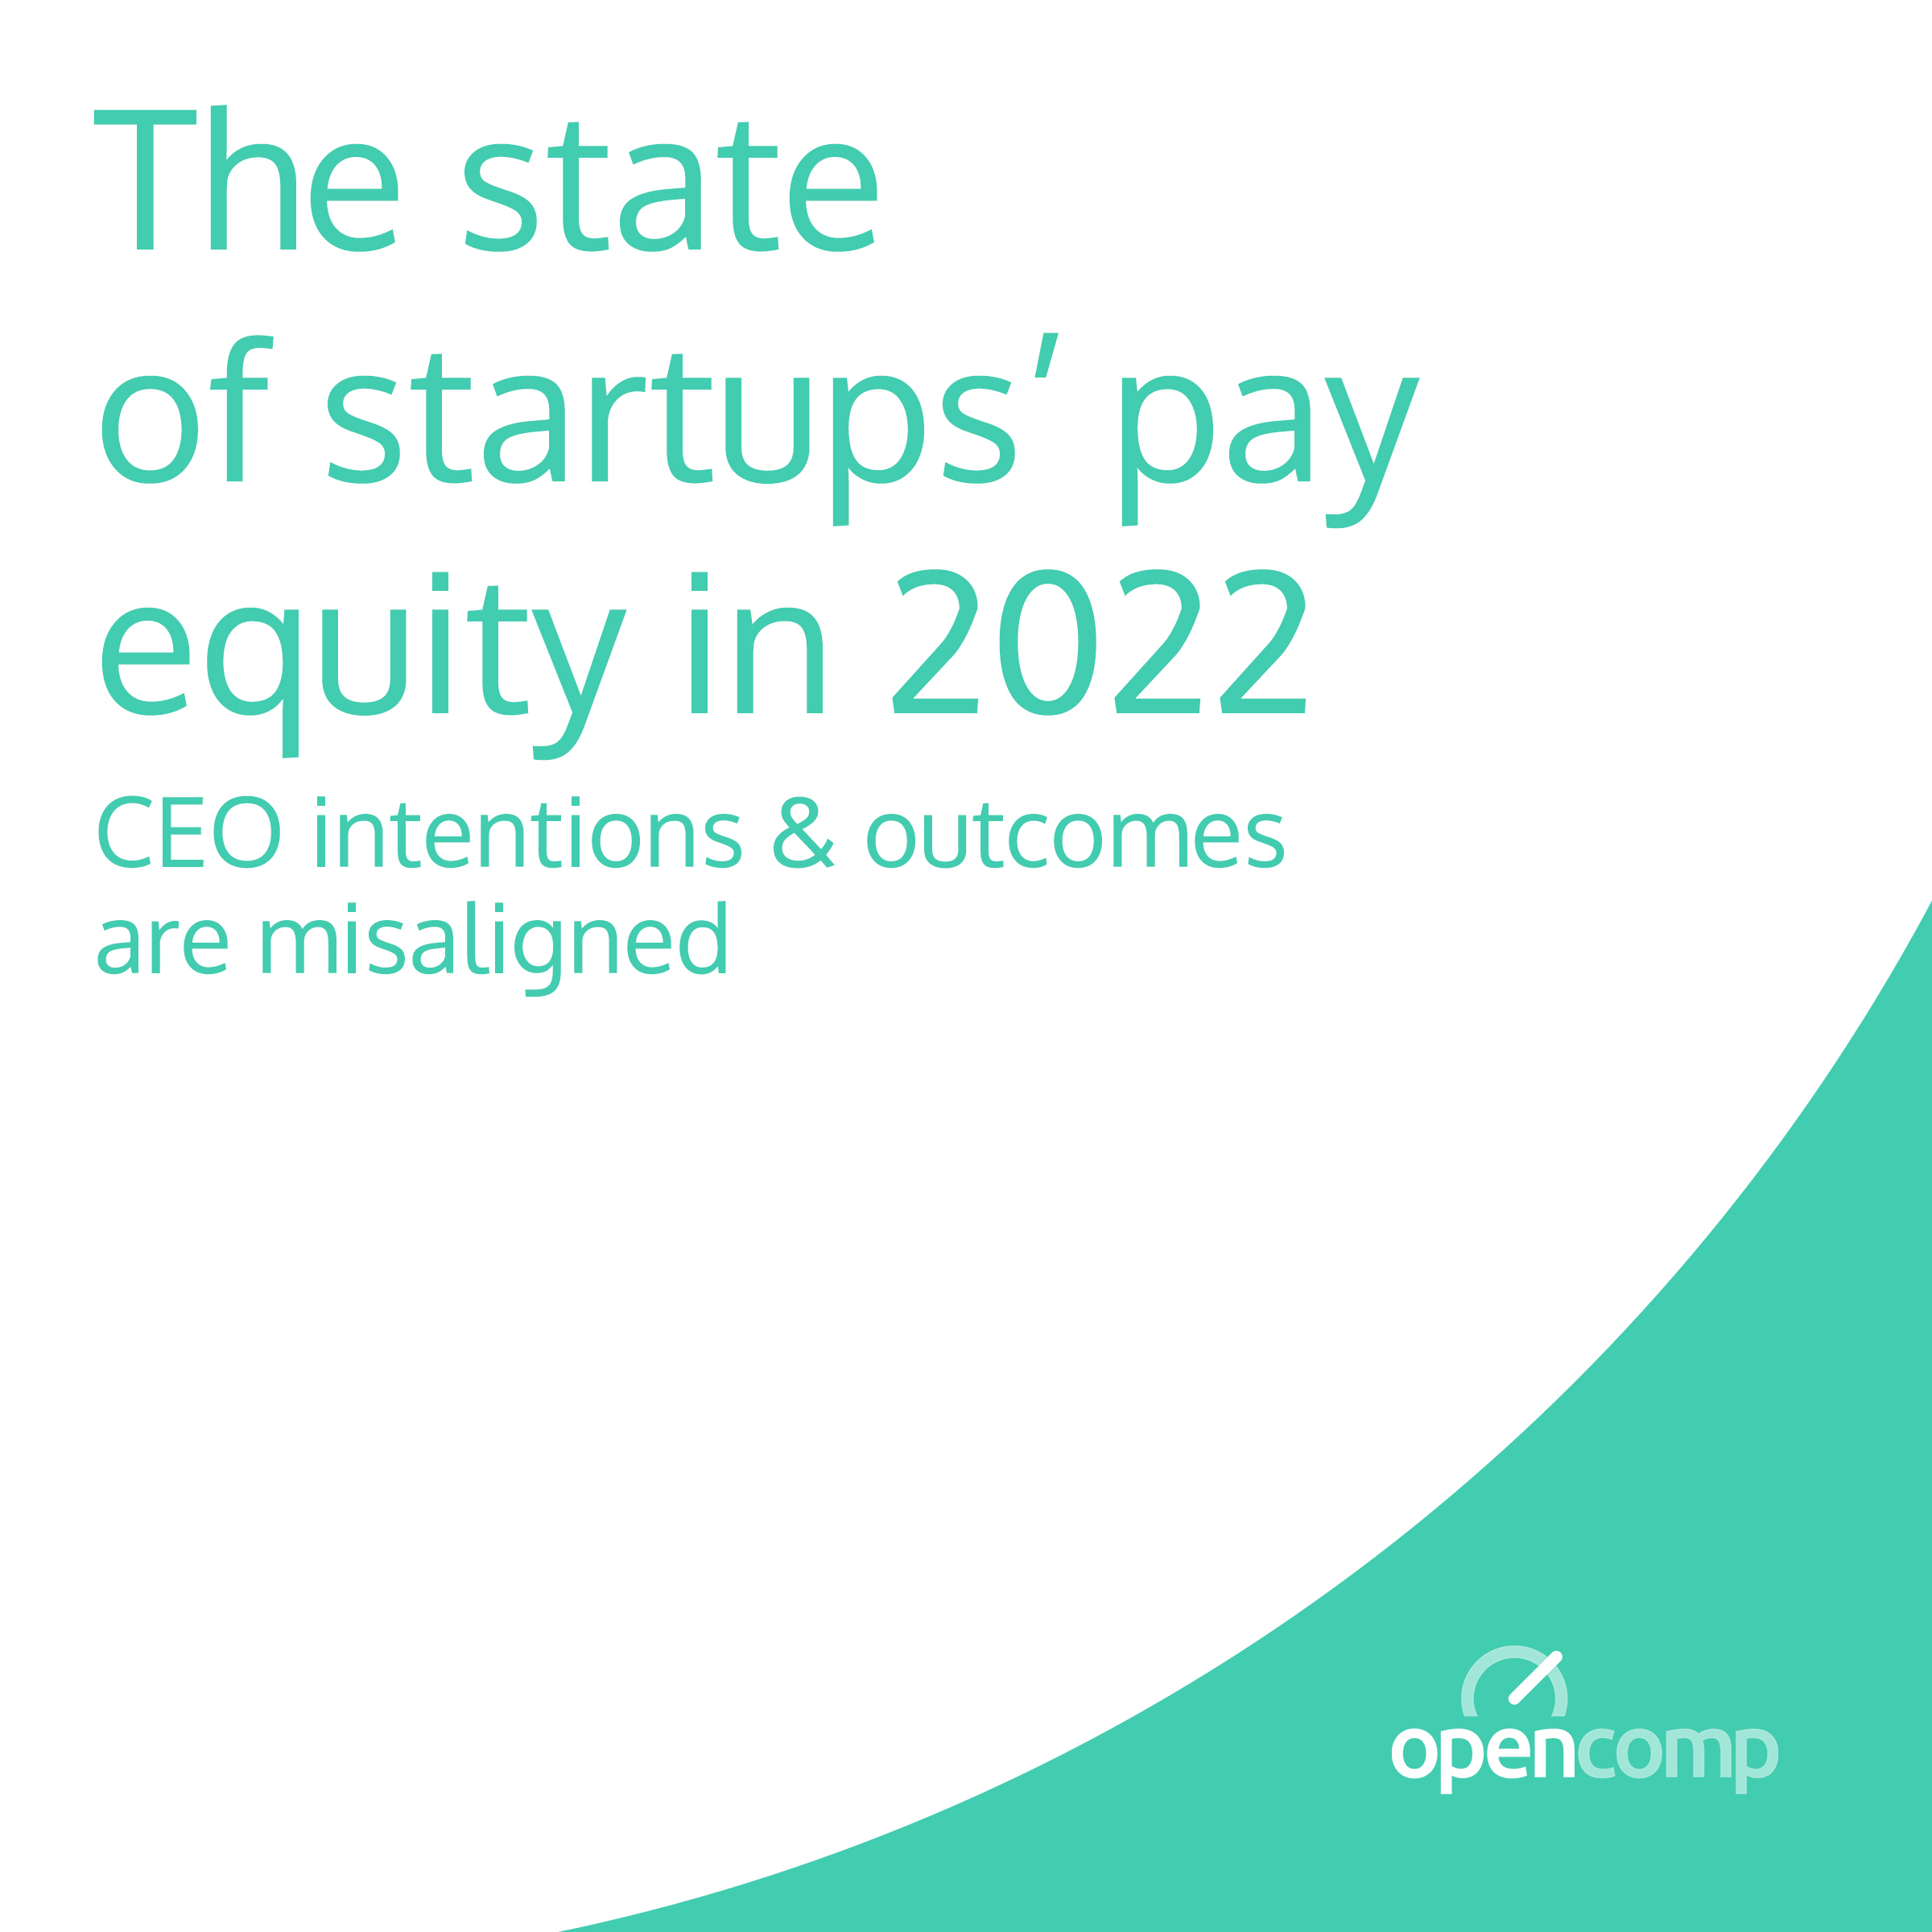 The 2022 state of startups - a pay equity analysis on CEOs